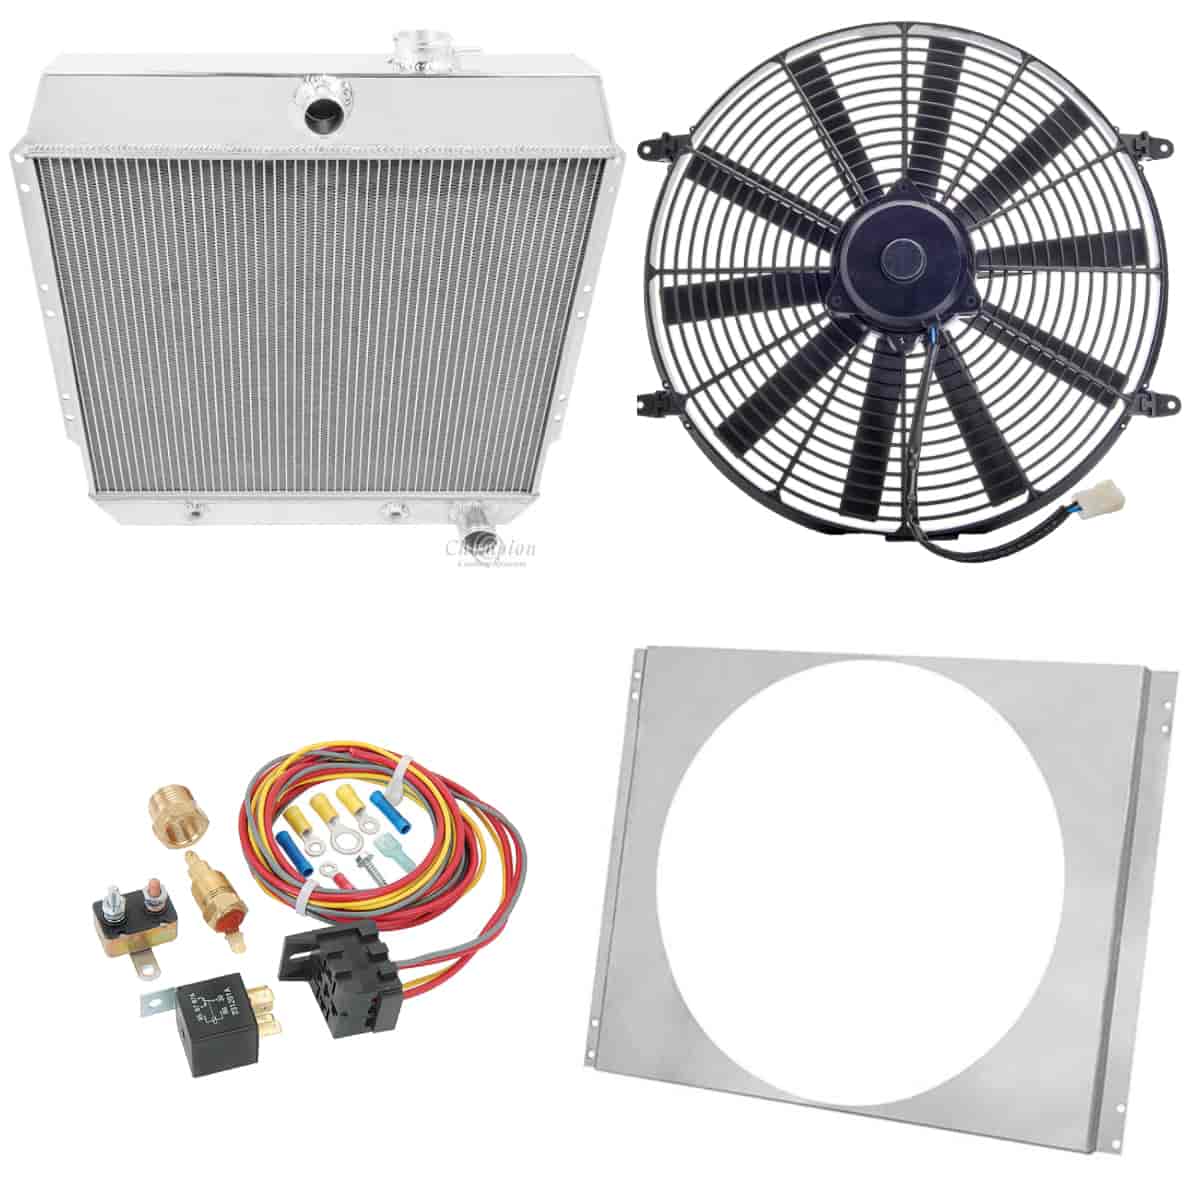 Radiator with Shroud and Fan Control Kit 1949-1954 Chevrolet Cars